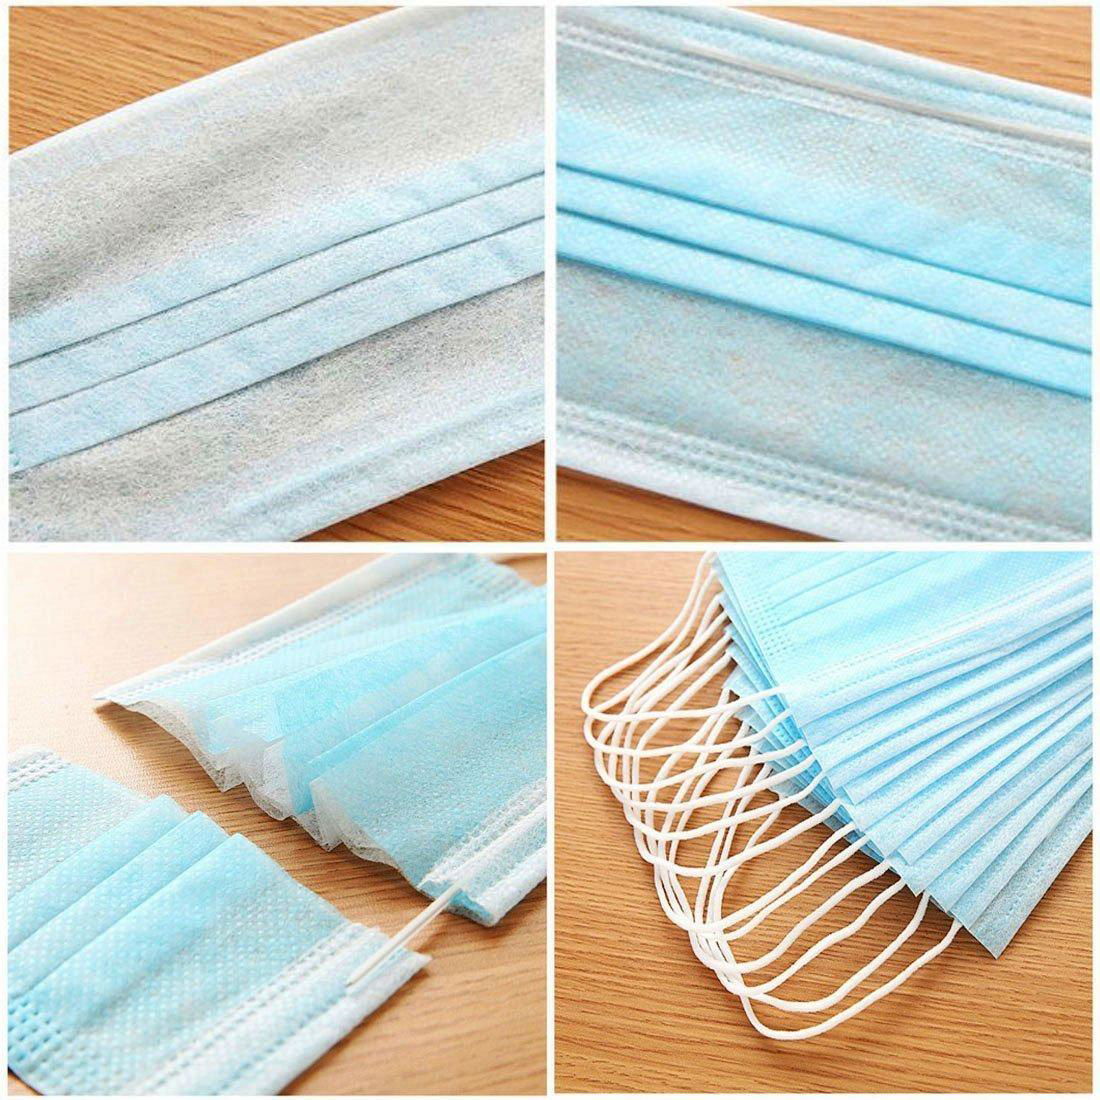 3-PLY Non-woven Fabric Disposable Surgical Masks 50 Pieces (Blue) 4